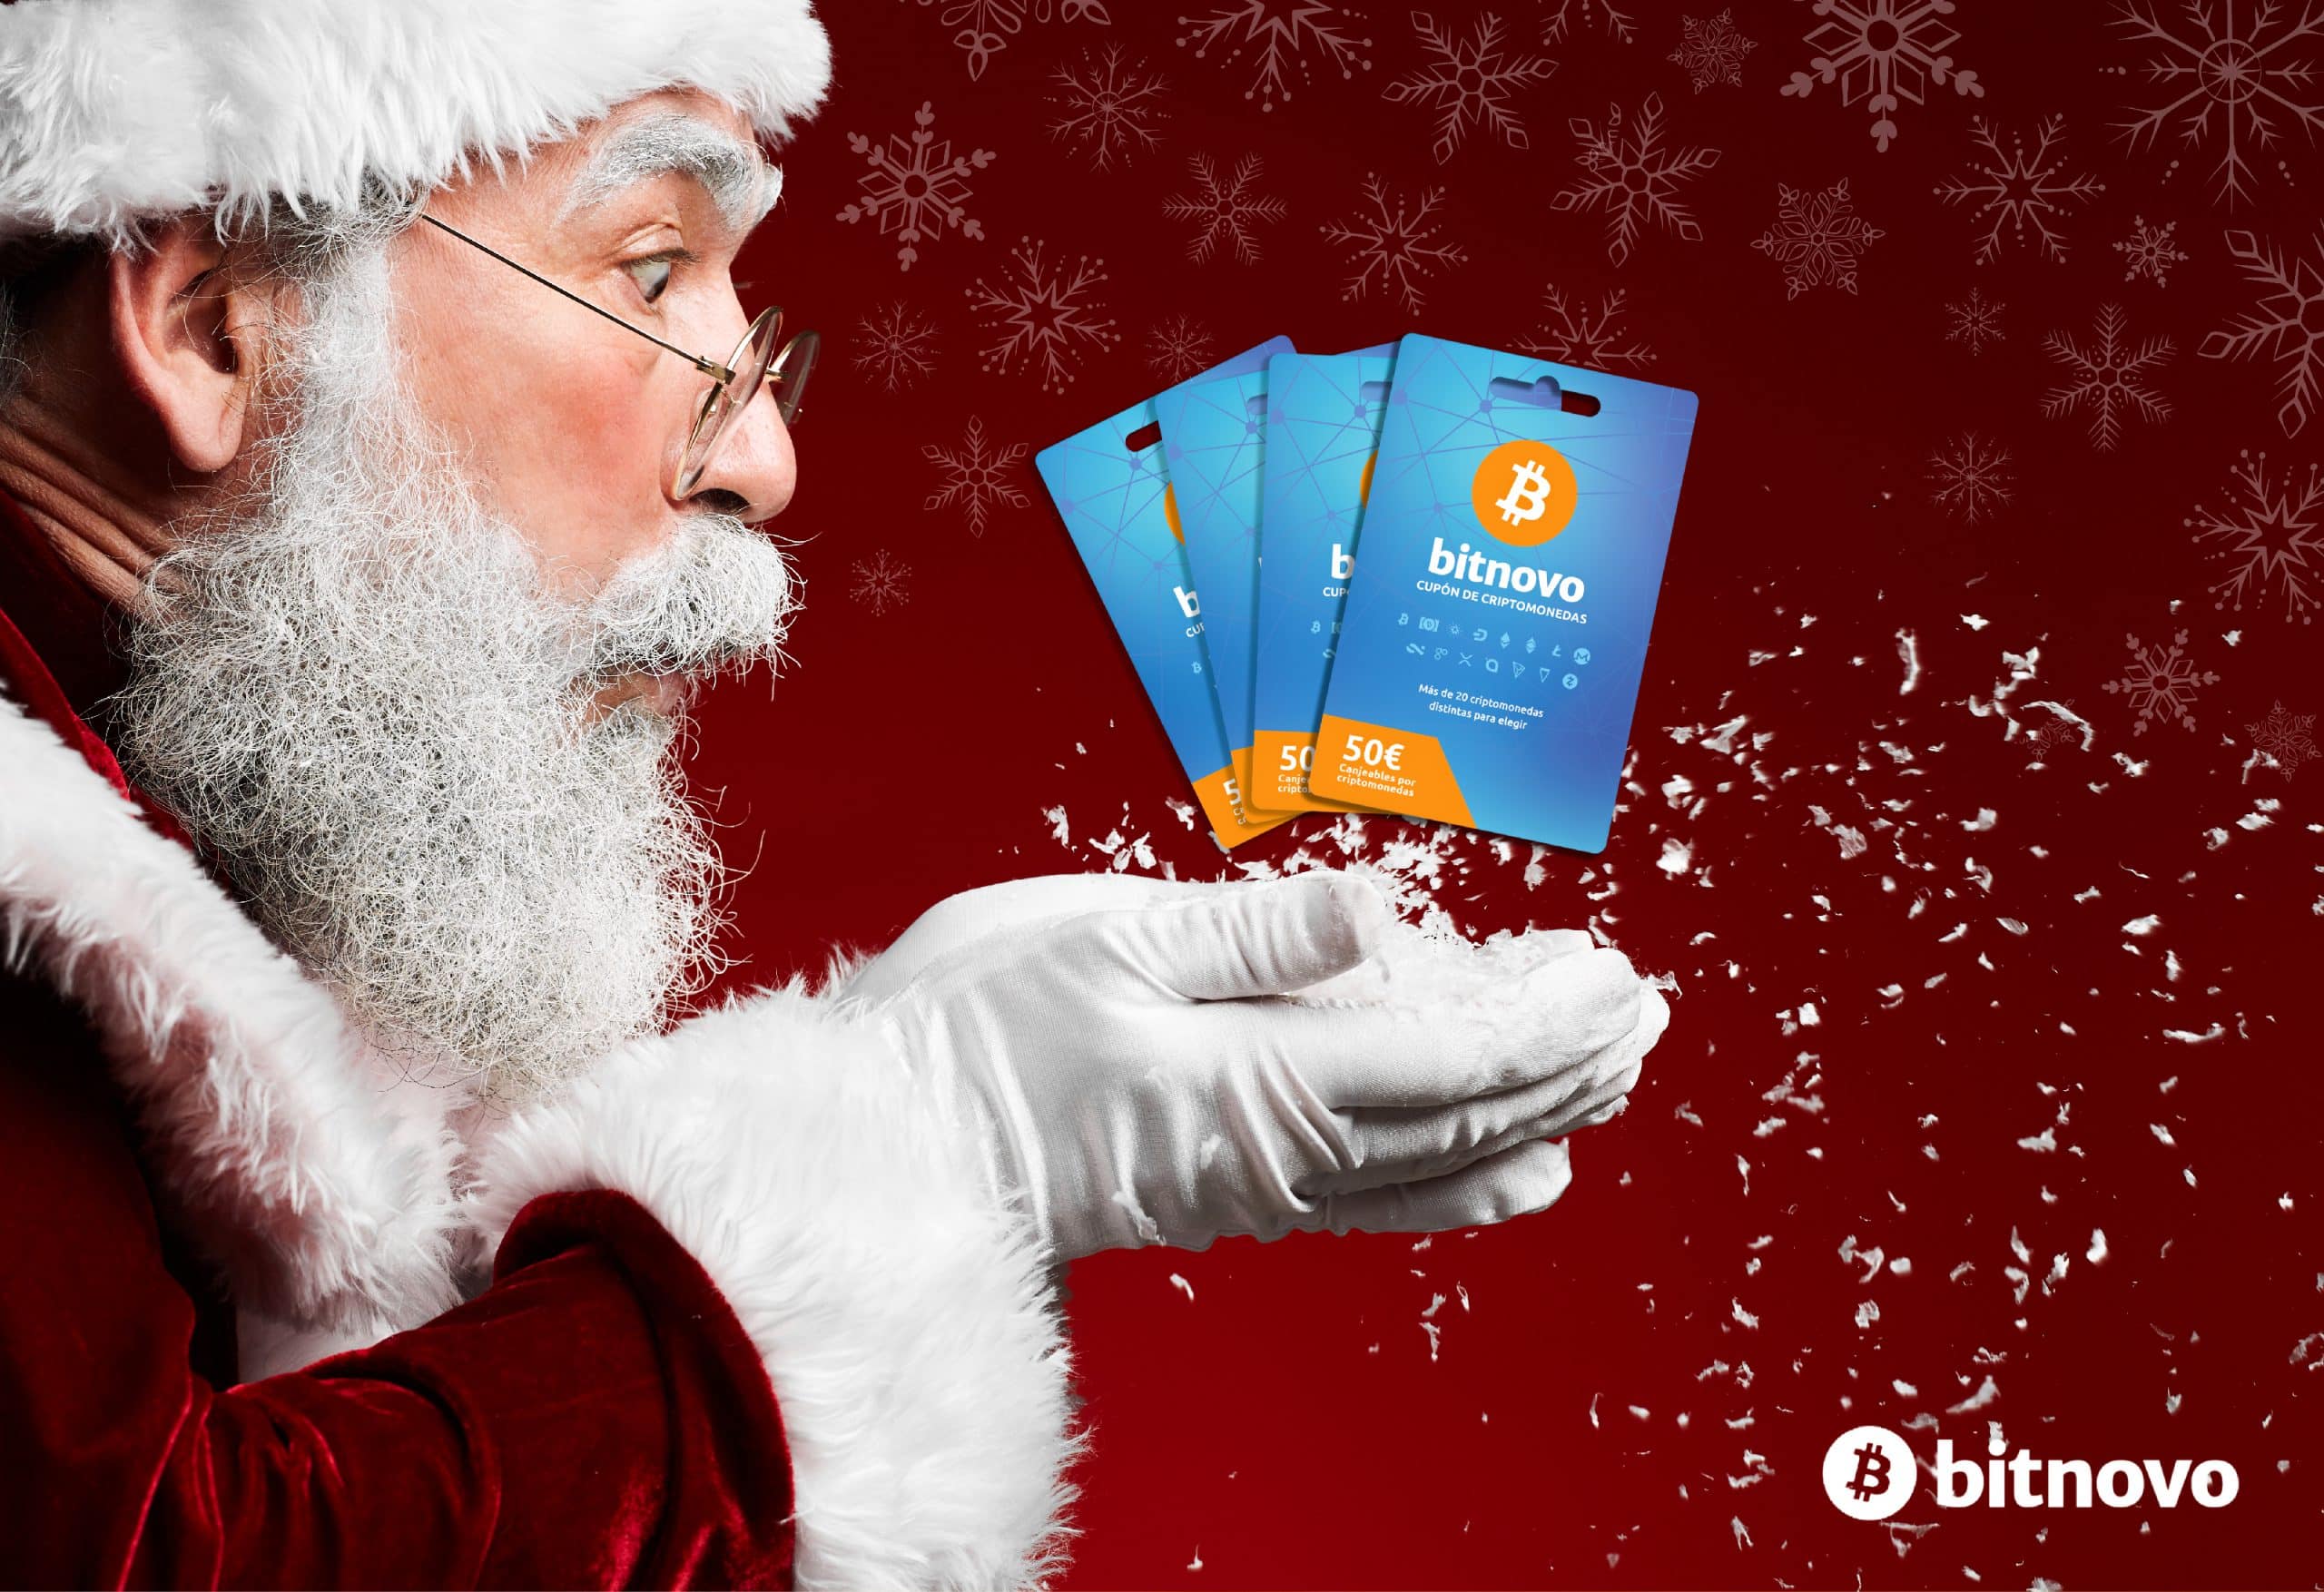 This Christmas give cryptocurrencies with Bitnovo gift cards!